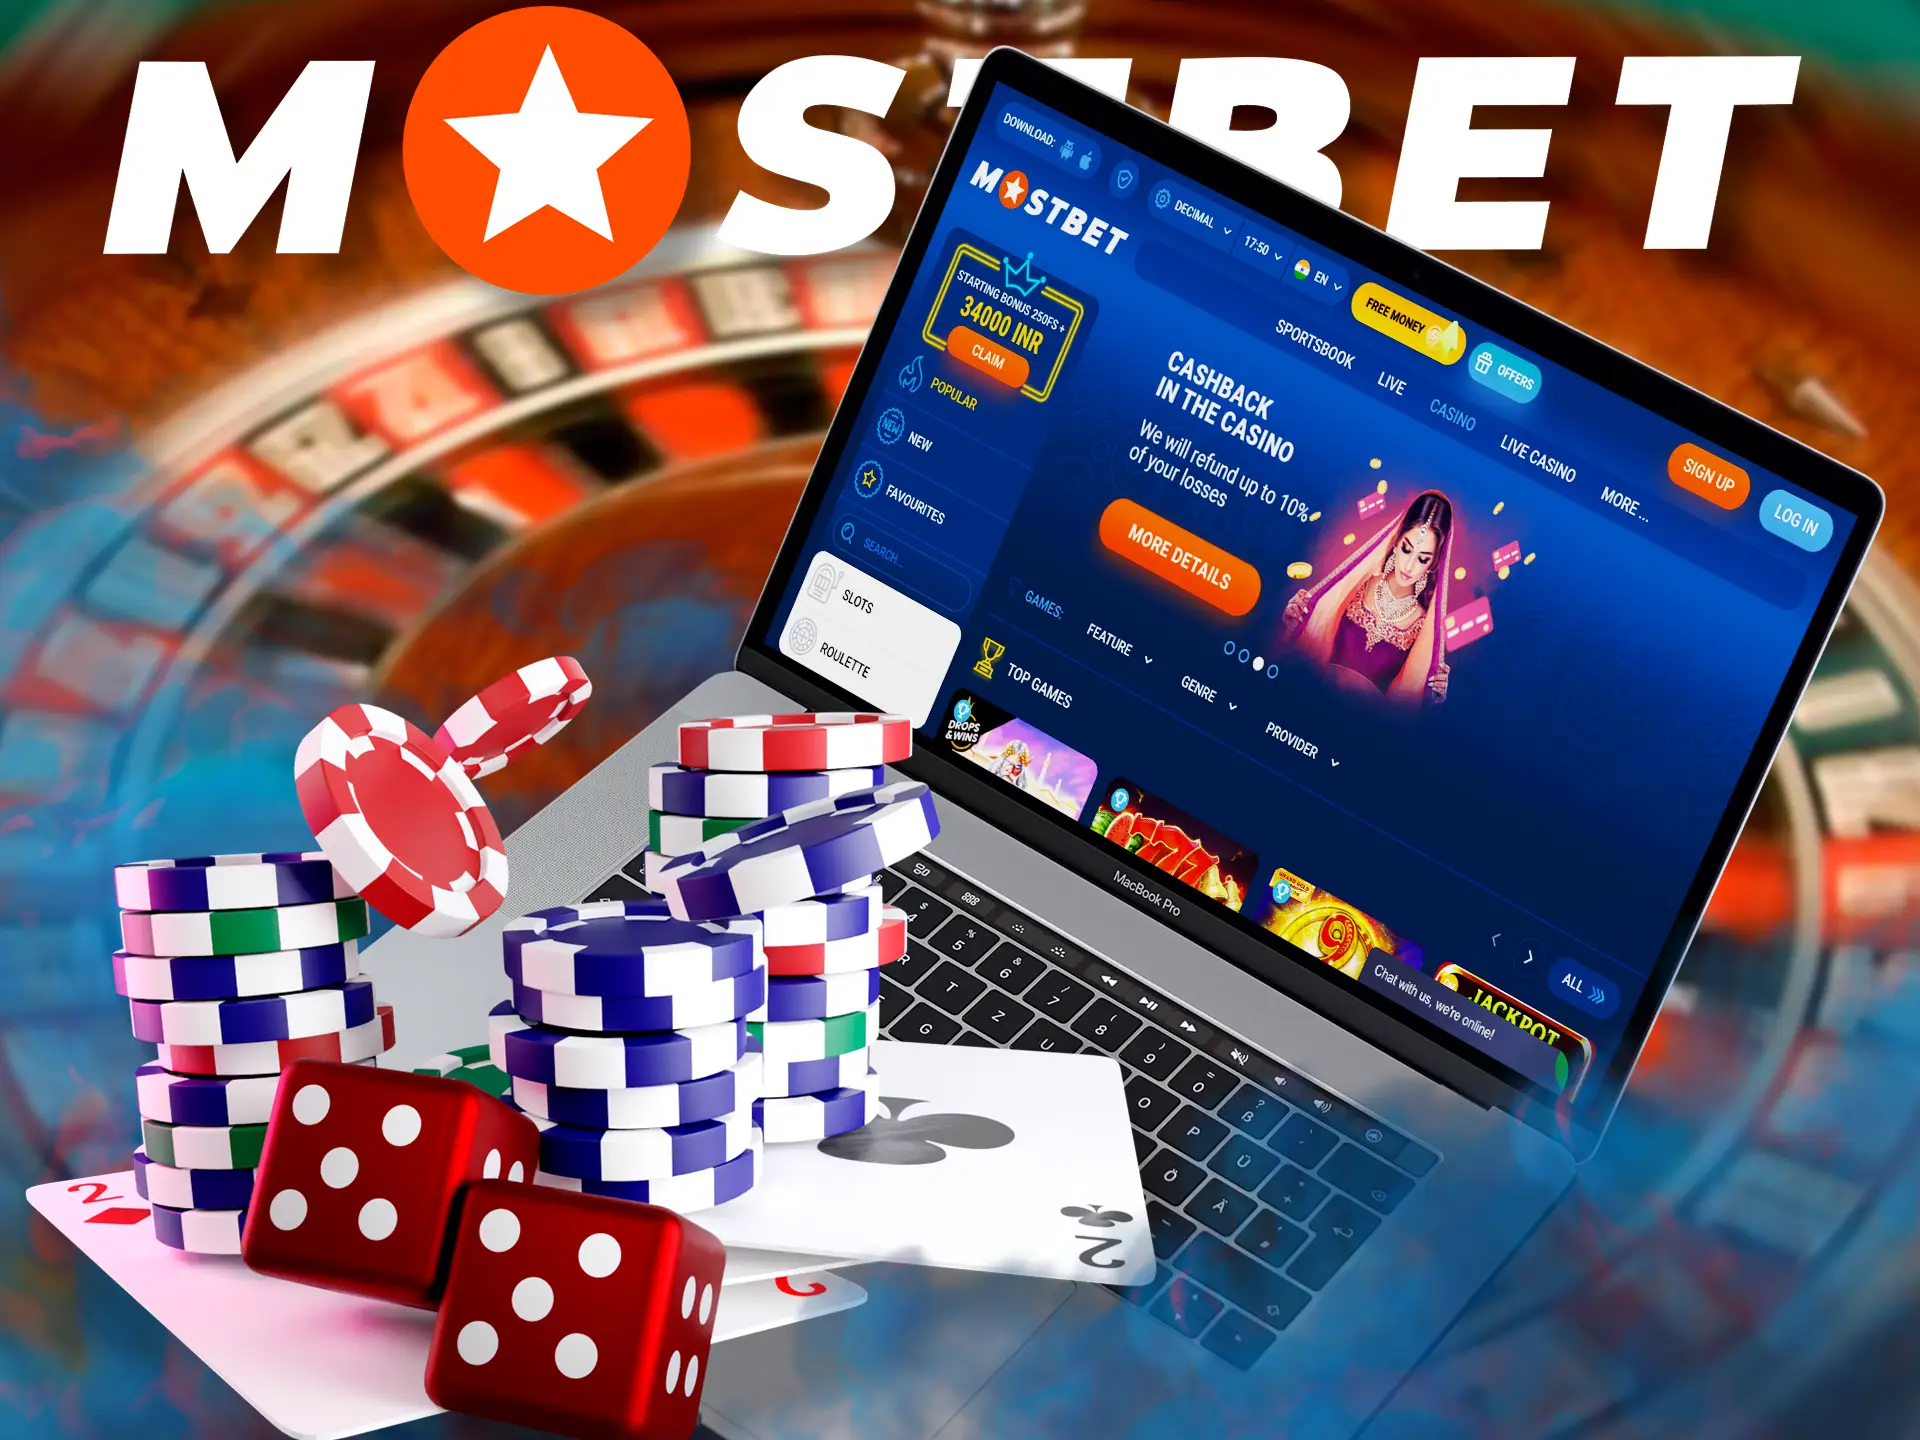 Mostbet analyses the needs of users and they offer games that match the skills and also like the people of India.